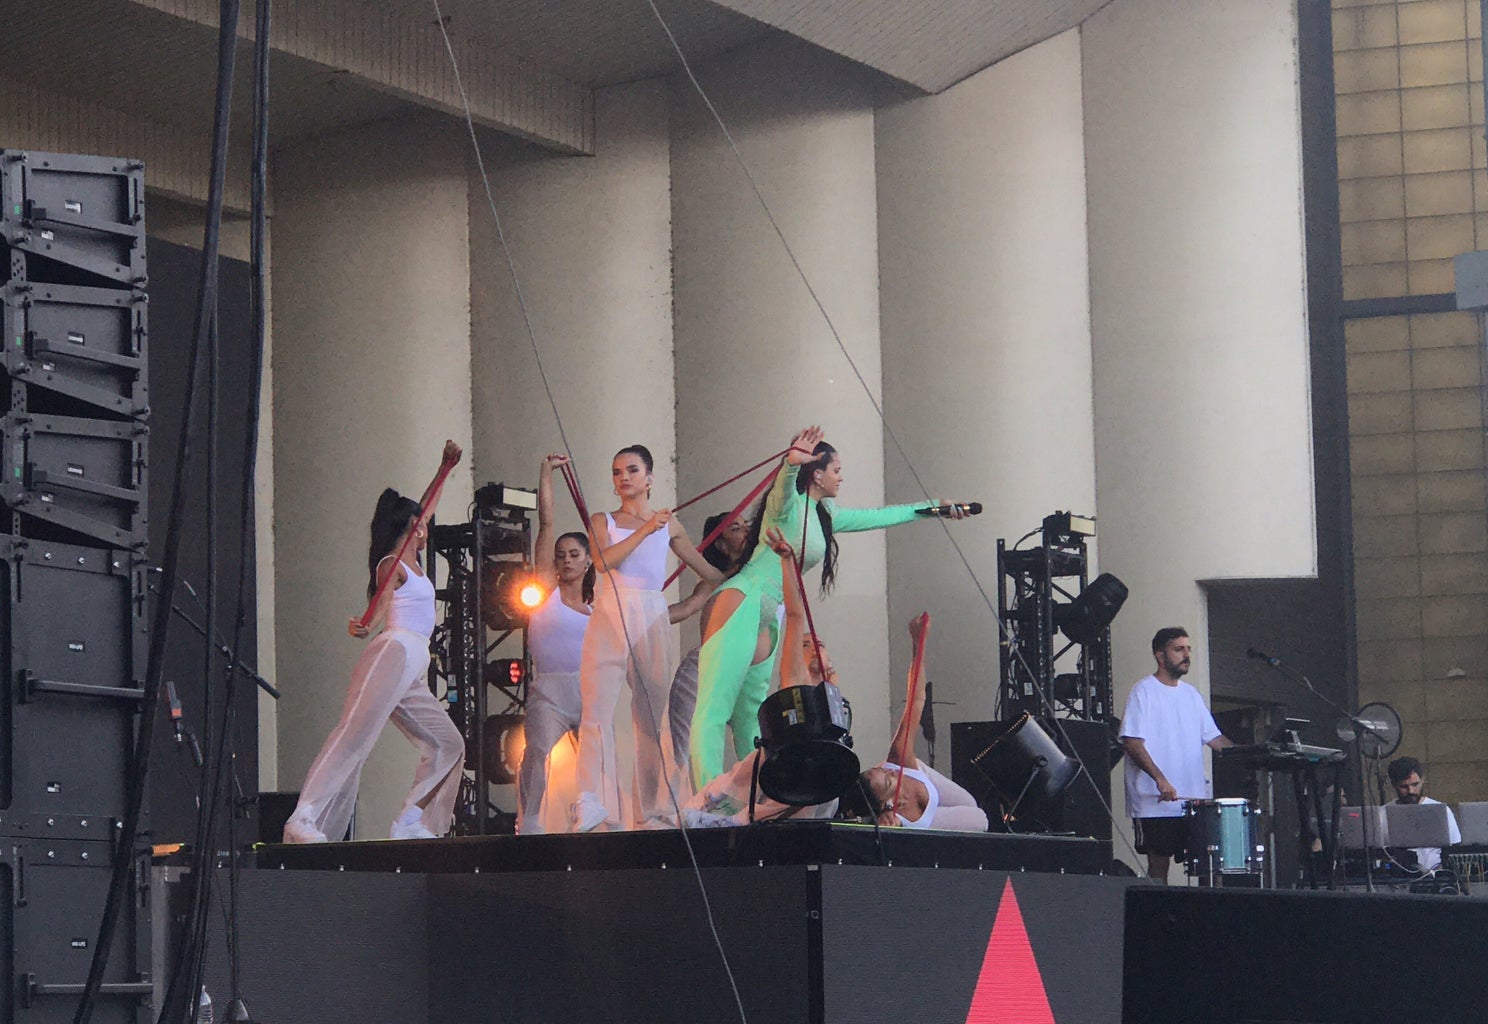 Spanish-singer Rosalia on stage with her dance crew